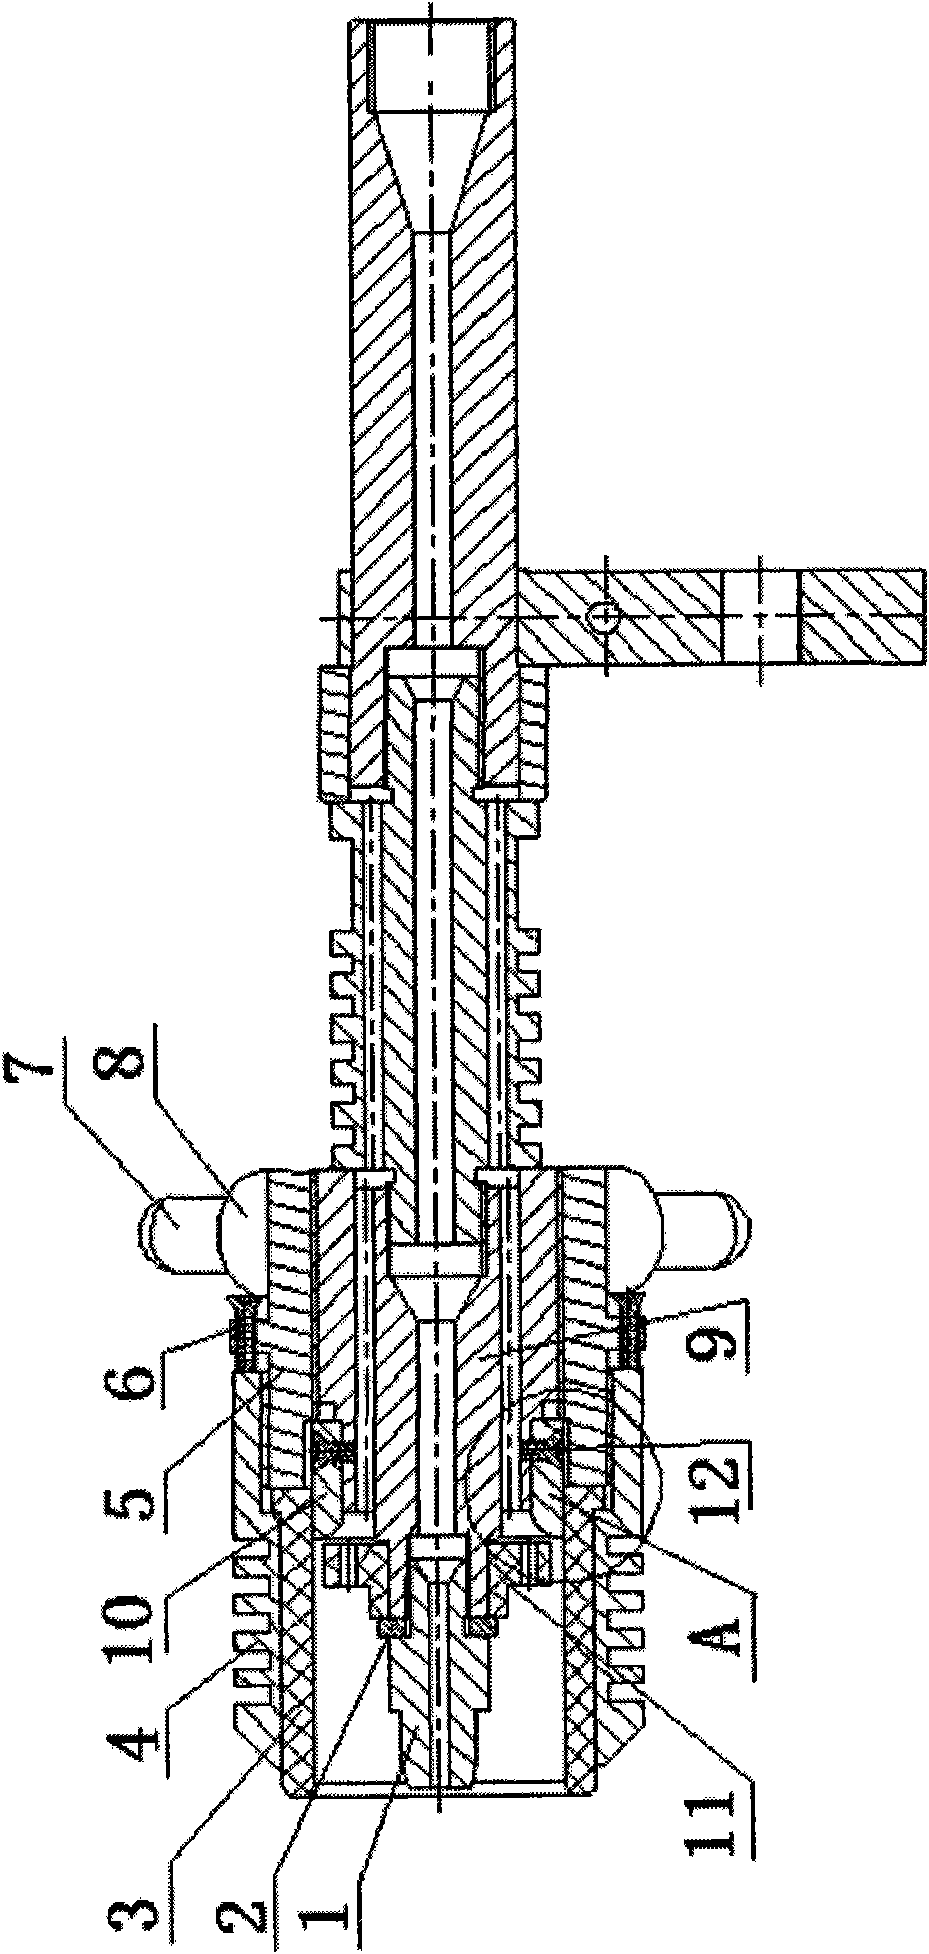 Novel self-rotating large-current MAG (Magnetic) welding composite nozzle welding gun for removing slag and slag removing method thereof